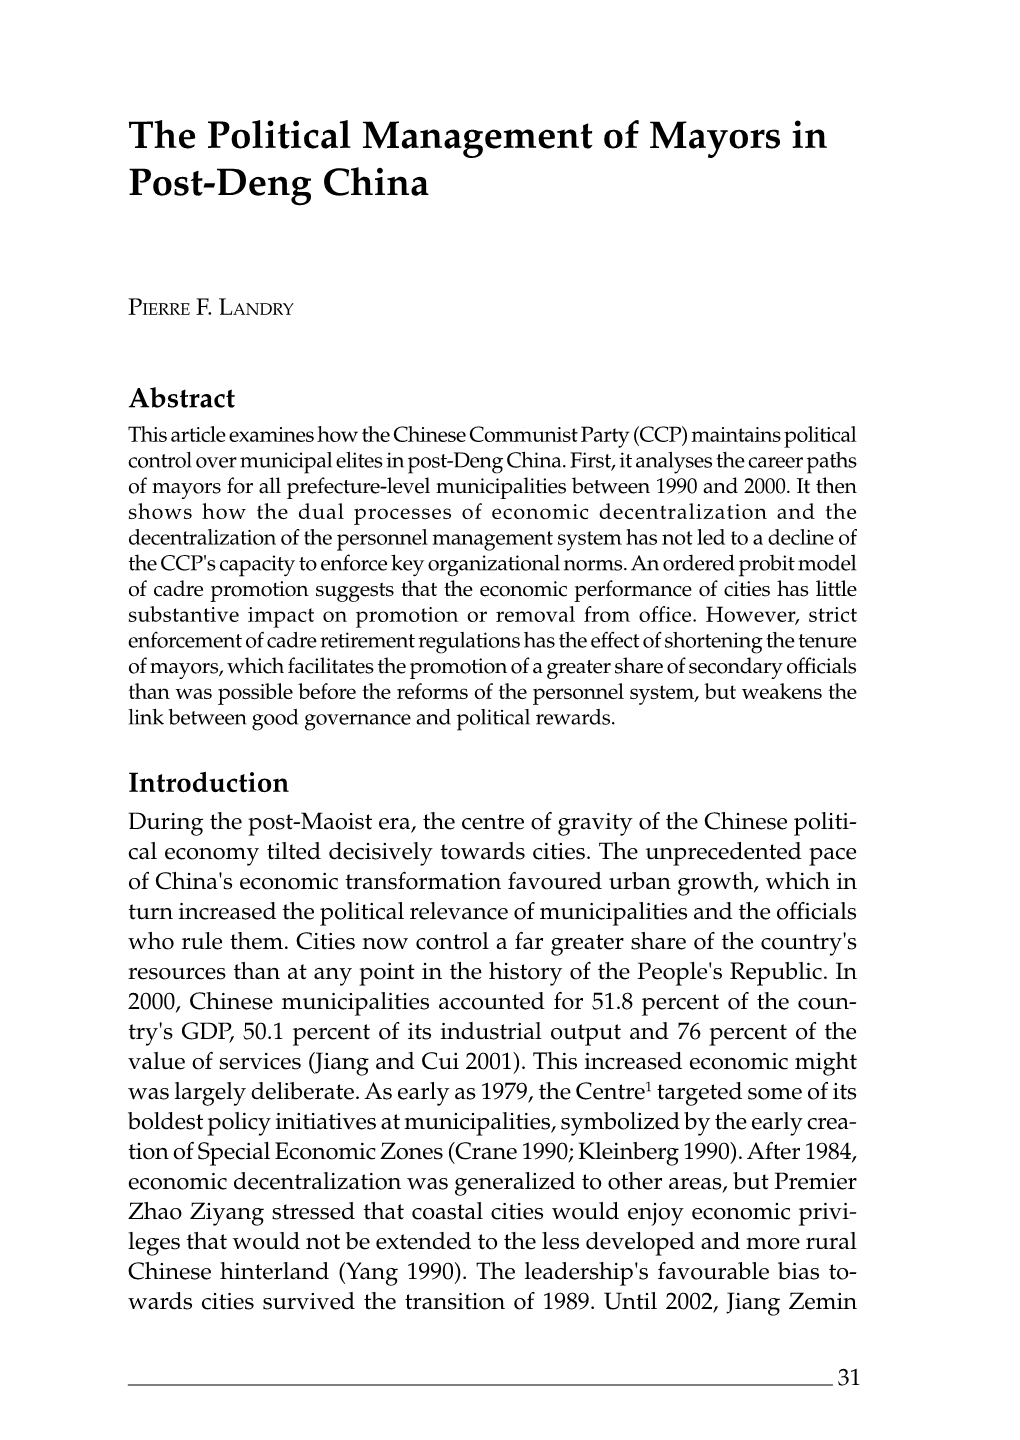 The Political Management of Mayors in Post-Deng China